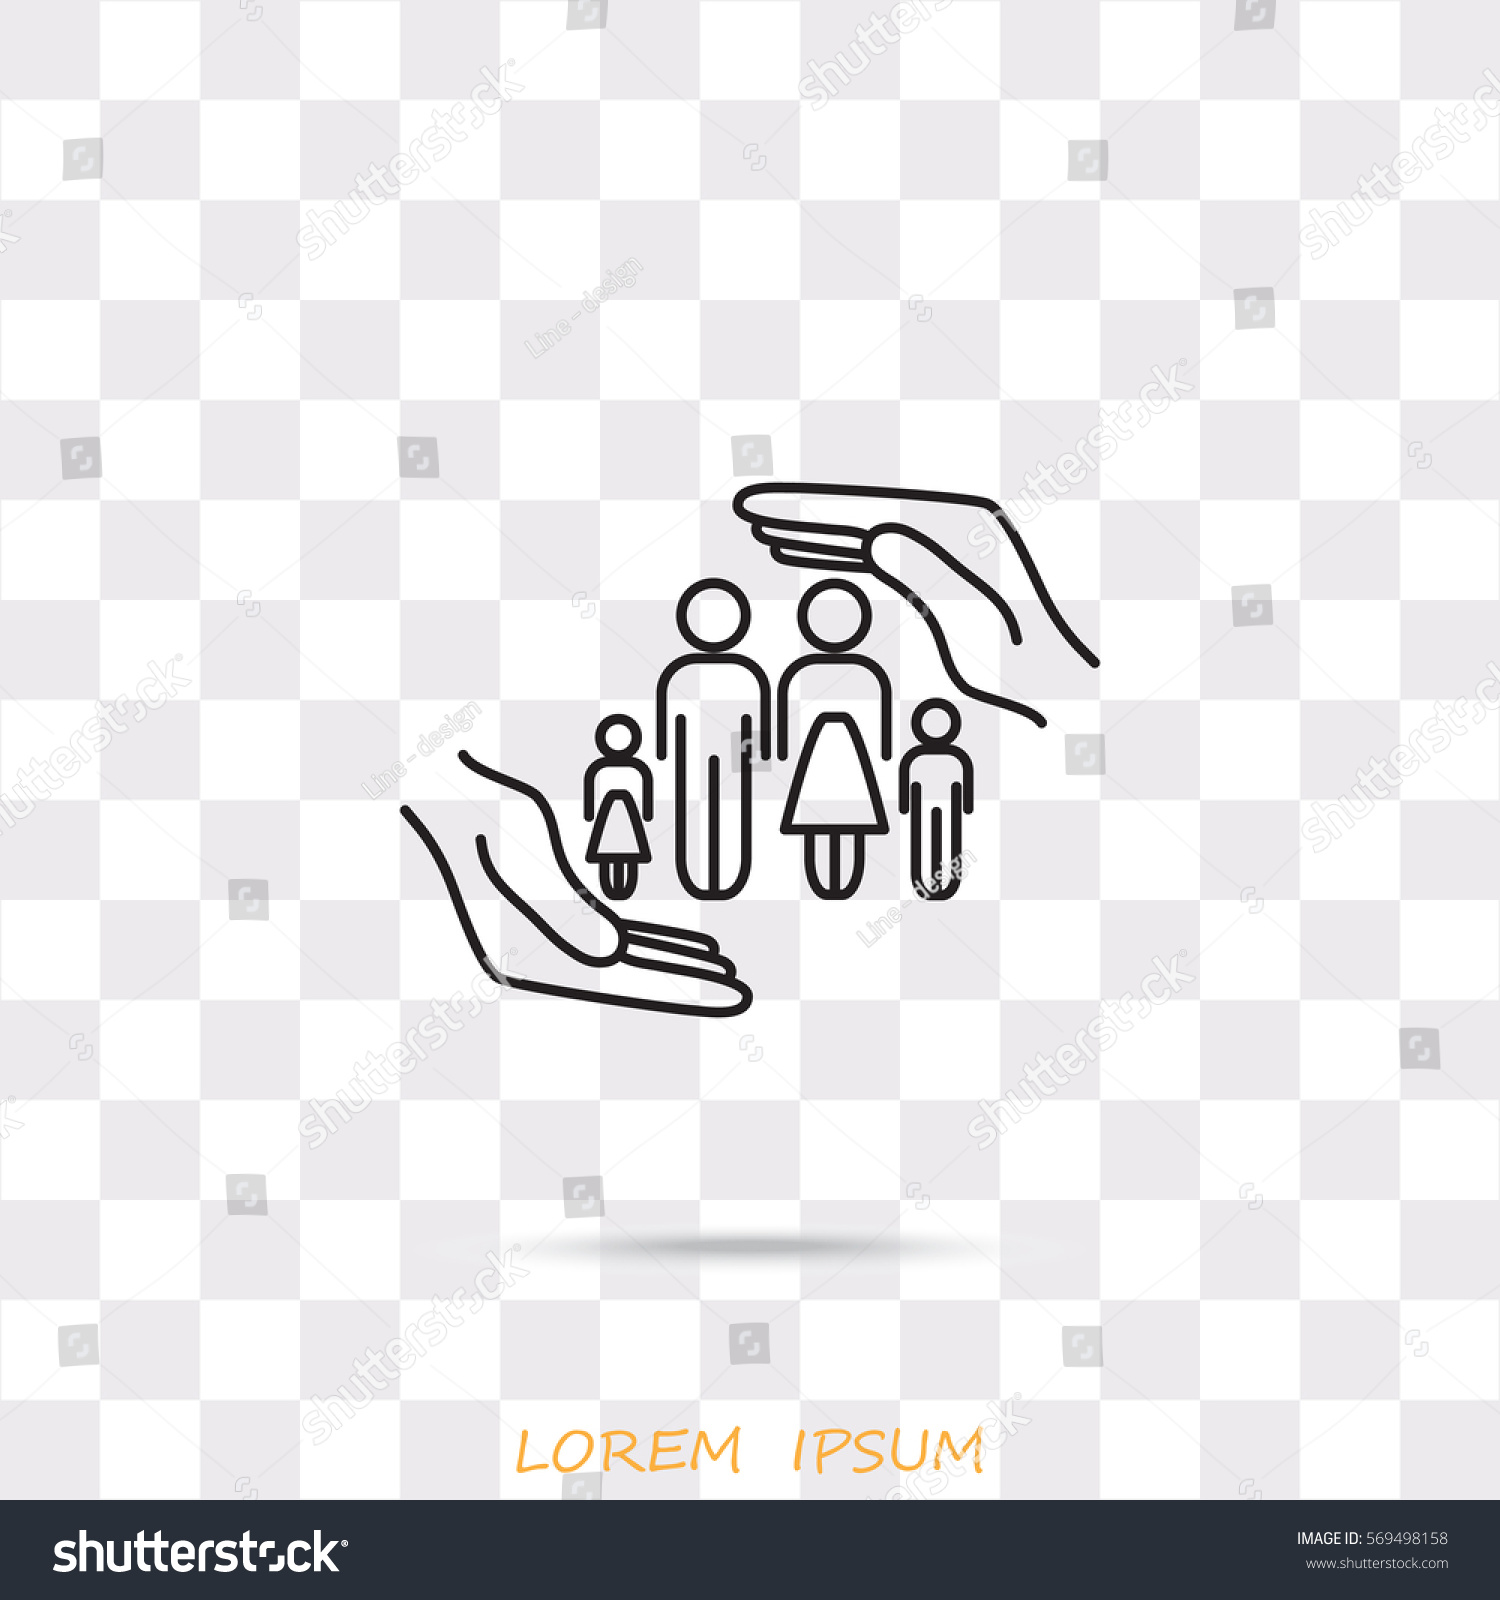 family life insurance quotes line icon family life insurance stock vector shutterstock